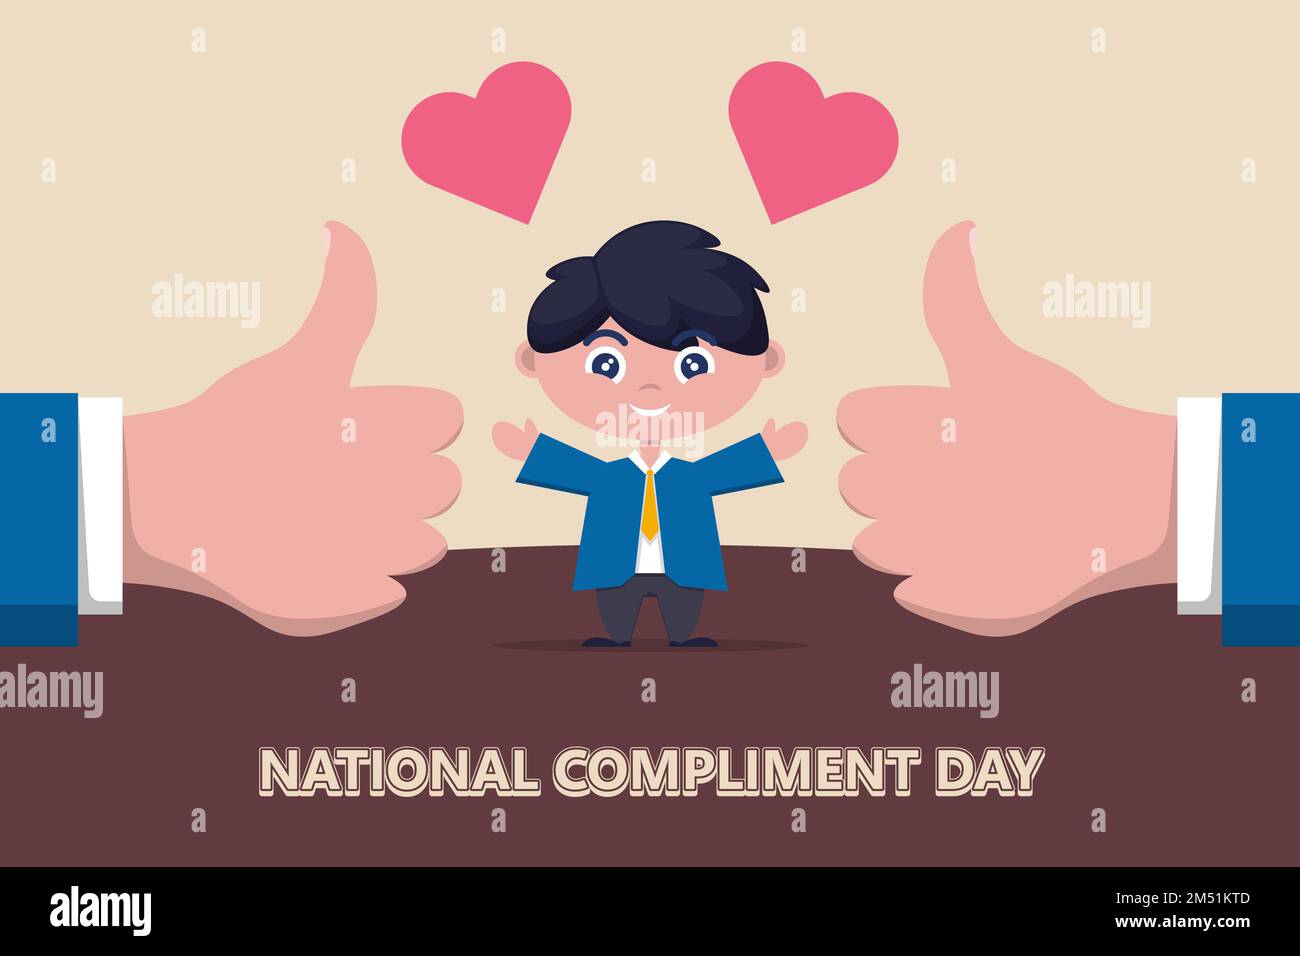 National Compliment Day background. Vector illustration design. Stock Photo